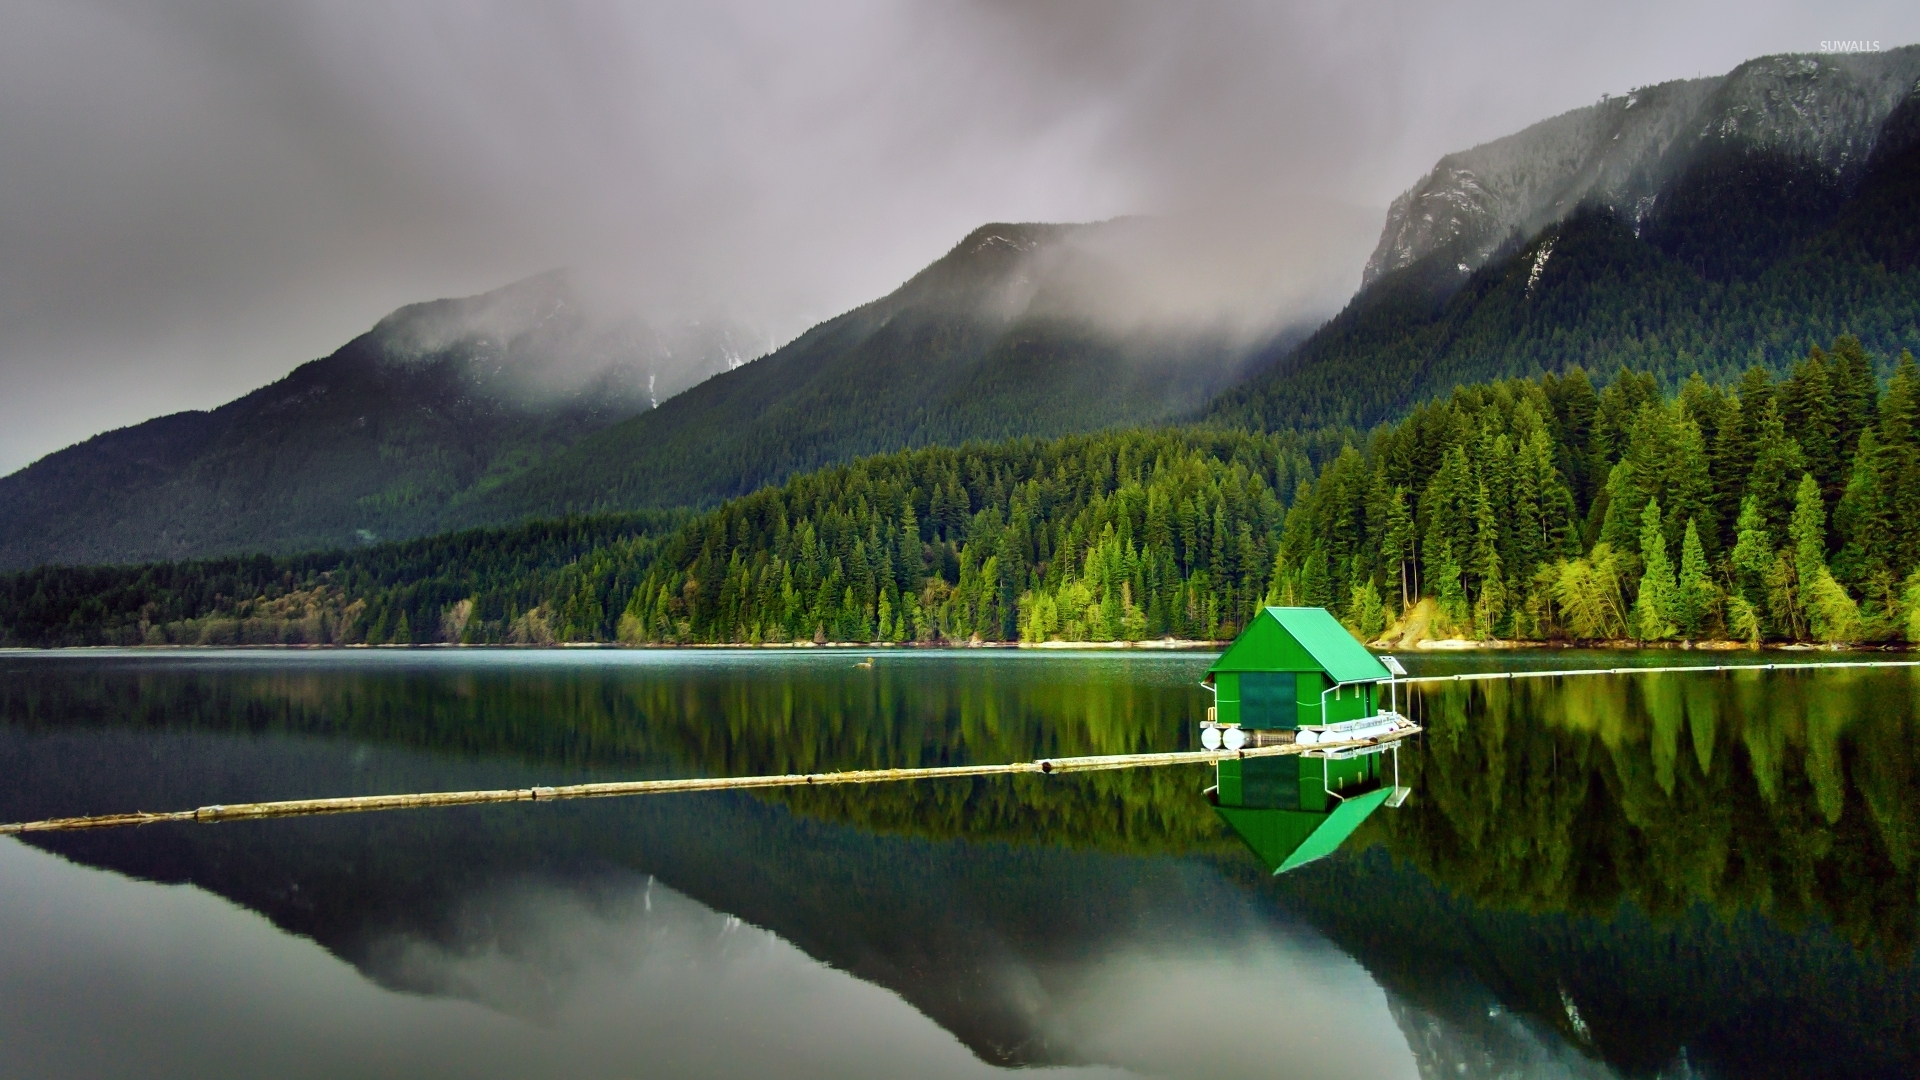 Green House On The Lake Wallpaper - Windows 10 Startup Backgrounds , HD Wallpaper & Backgrounds